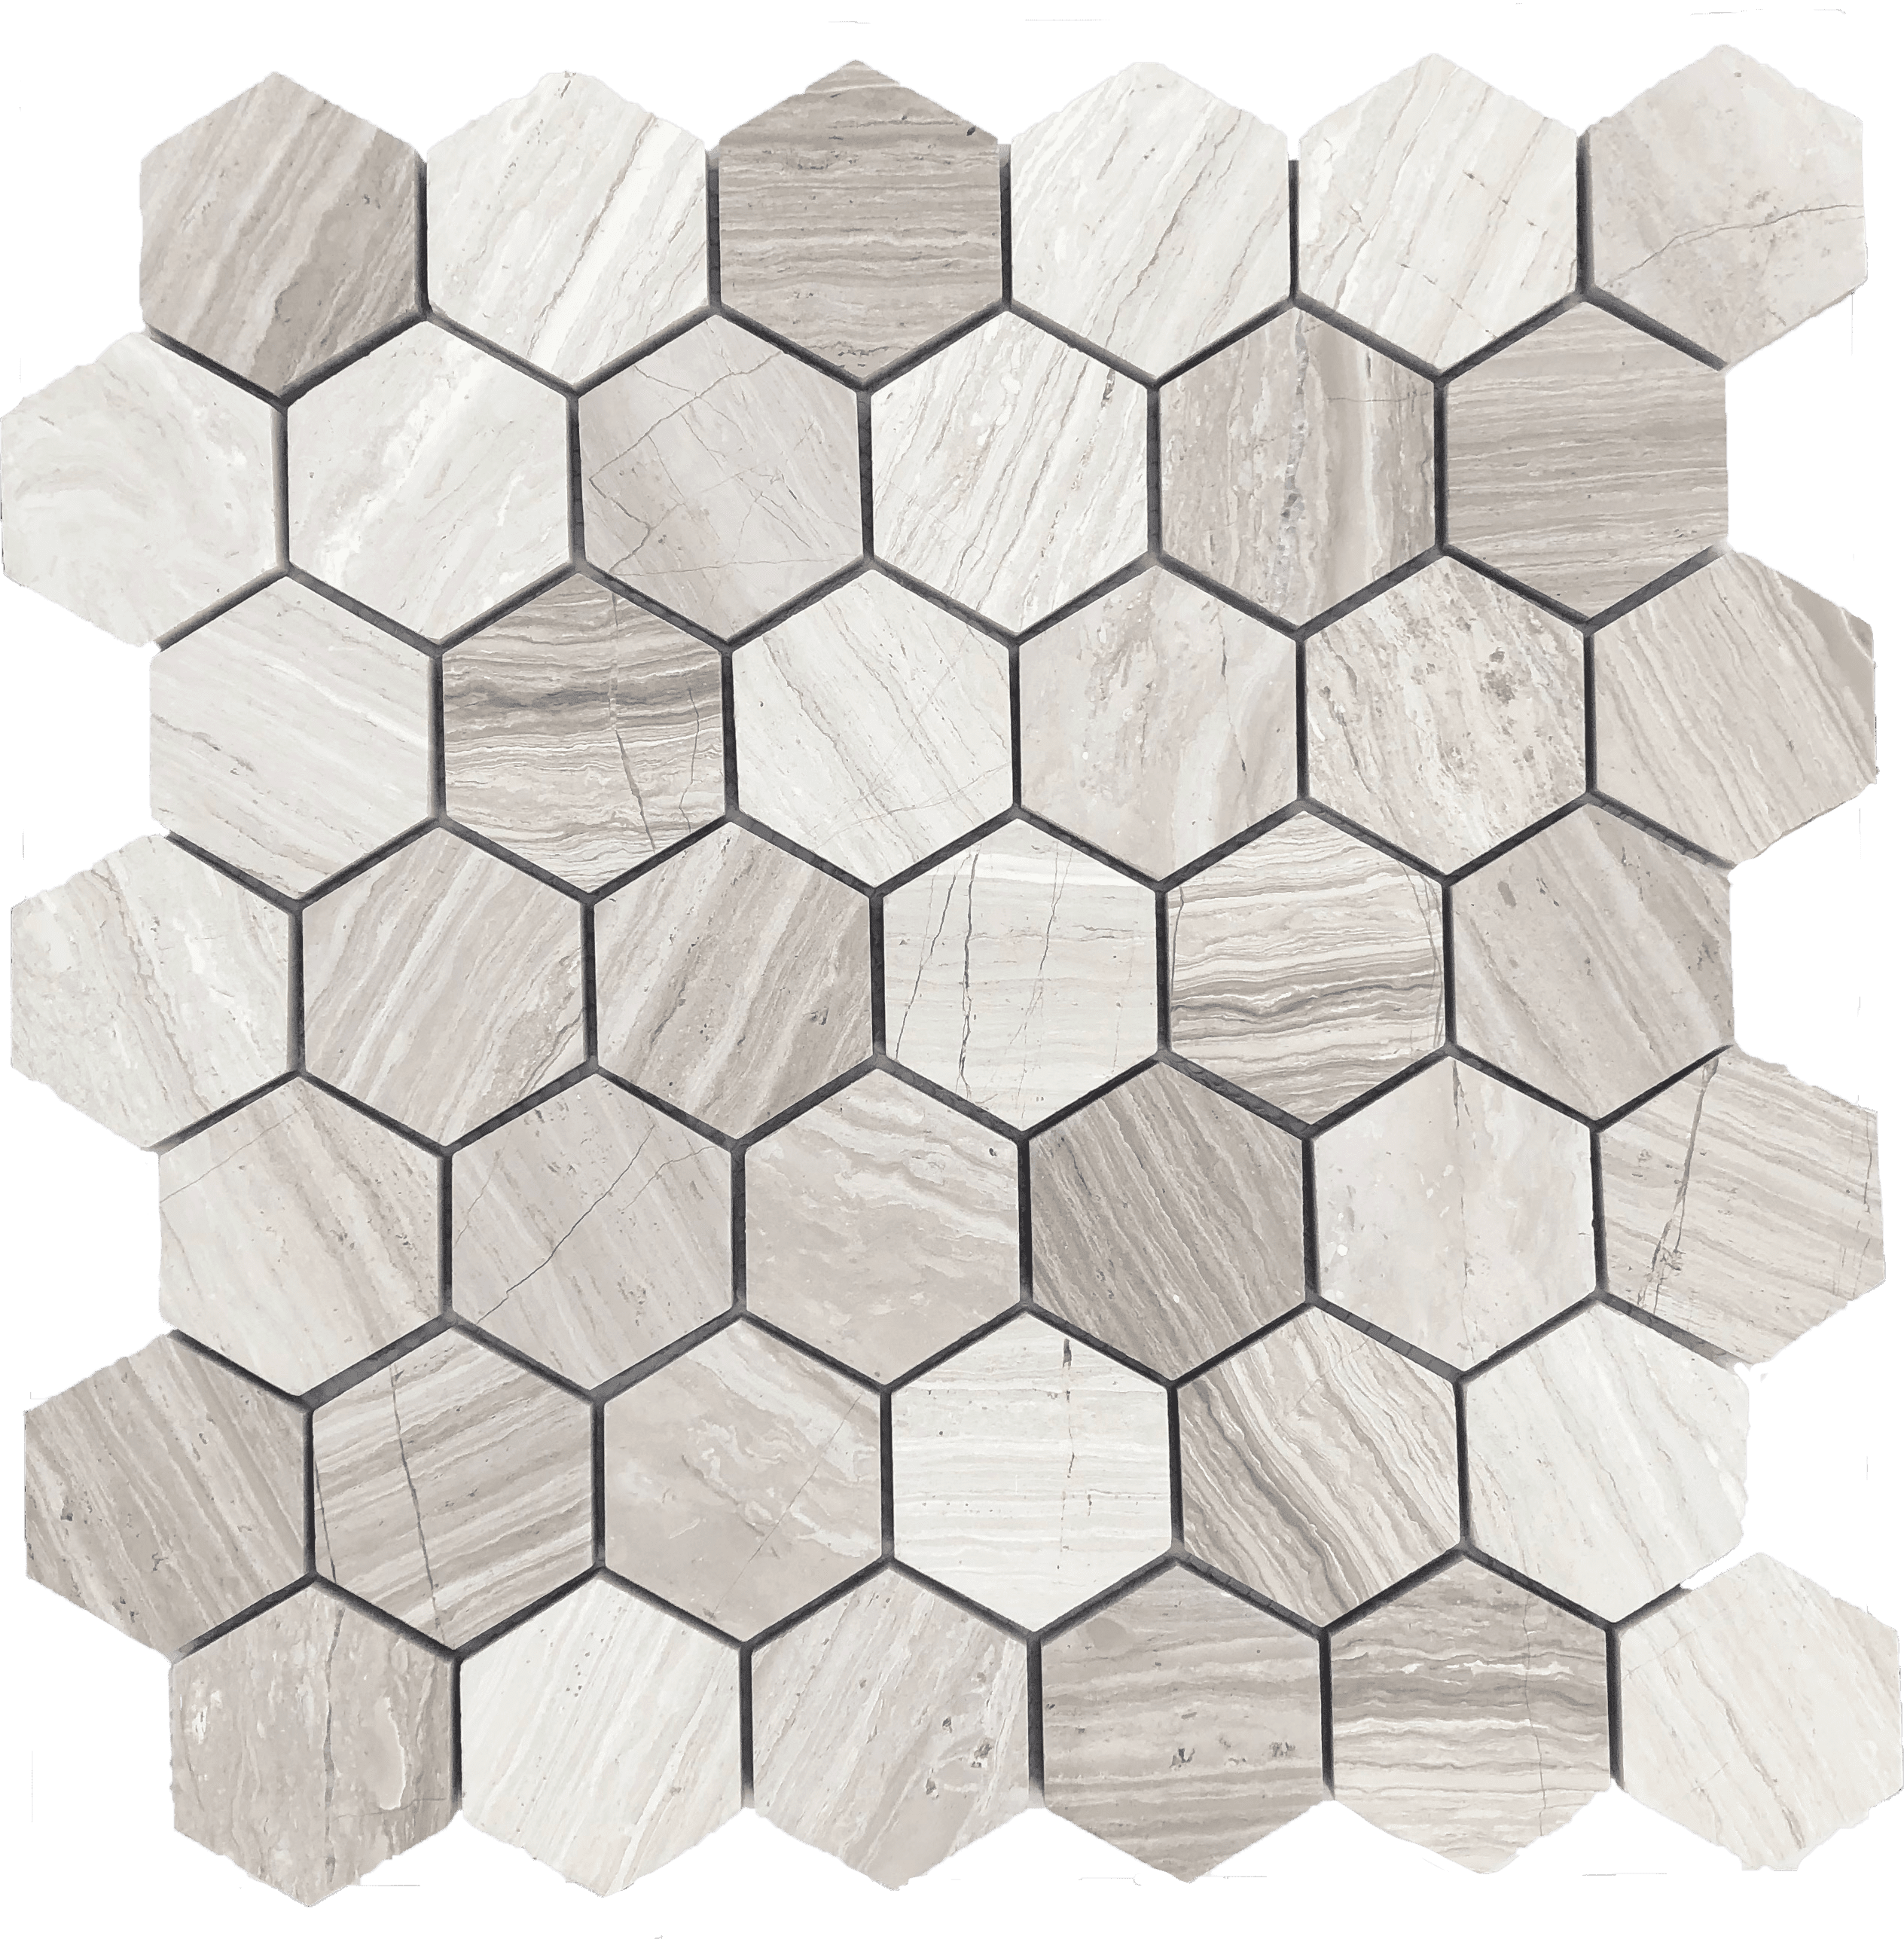 Silverwood Marble Hex - MOSAICS4YOU